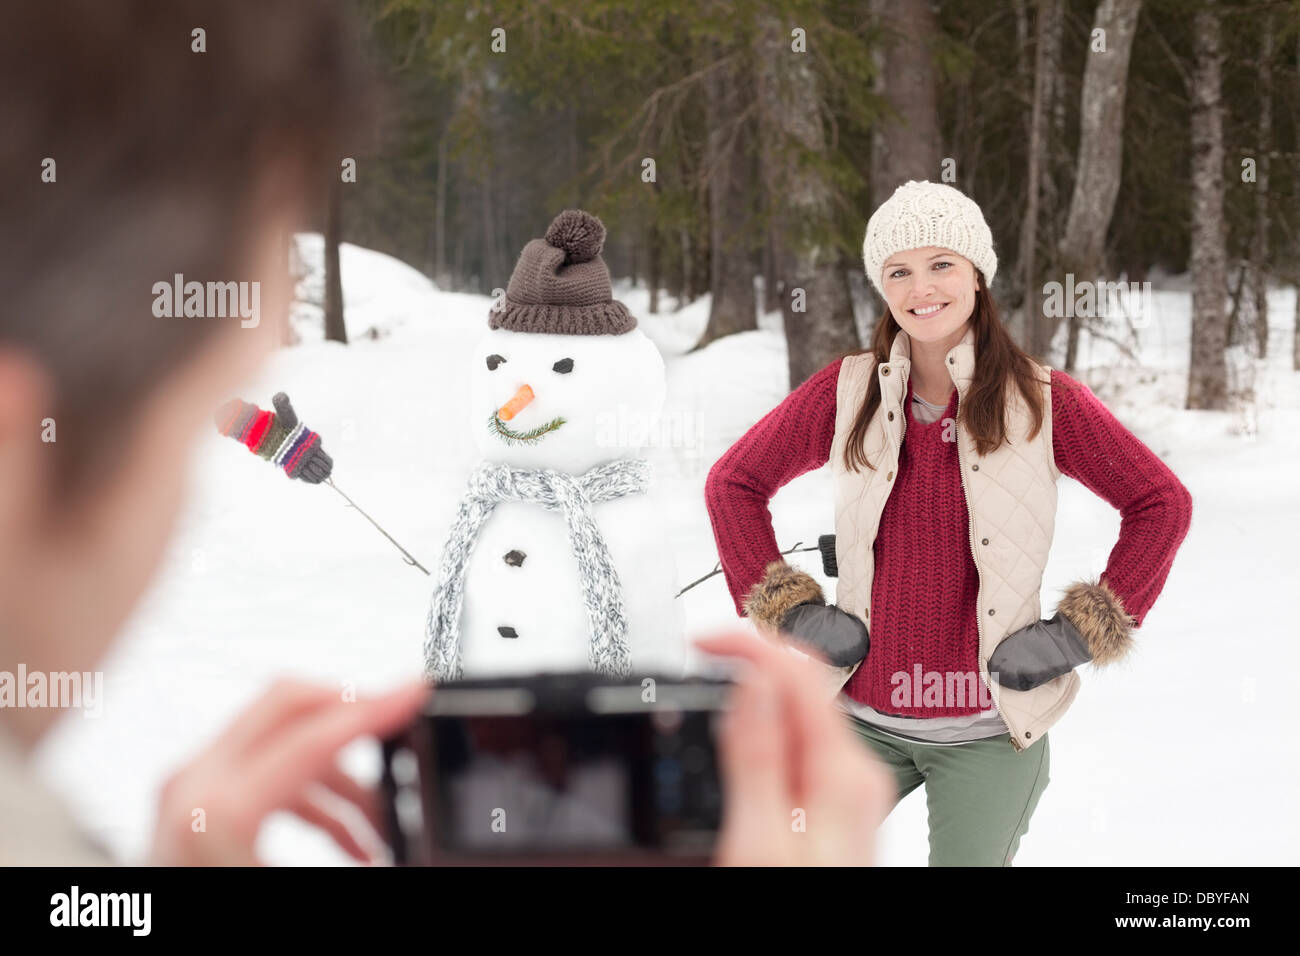 Man photographing smiling woman with hands on hips next to snowman in woods Stock Photo